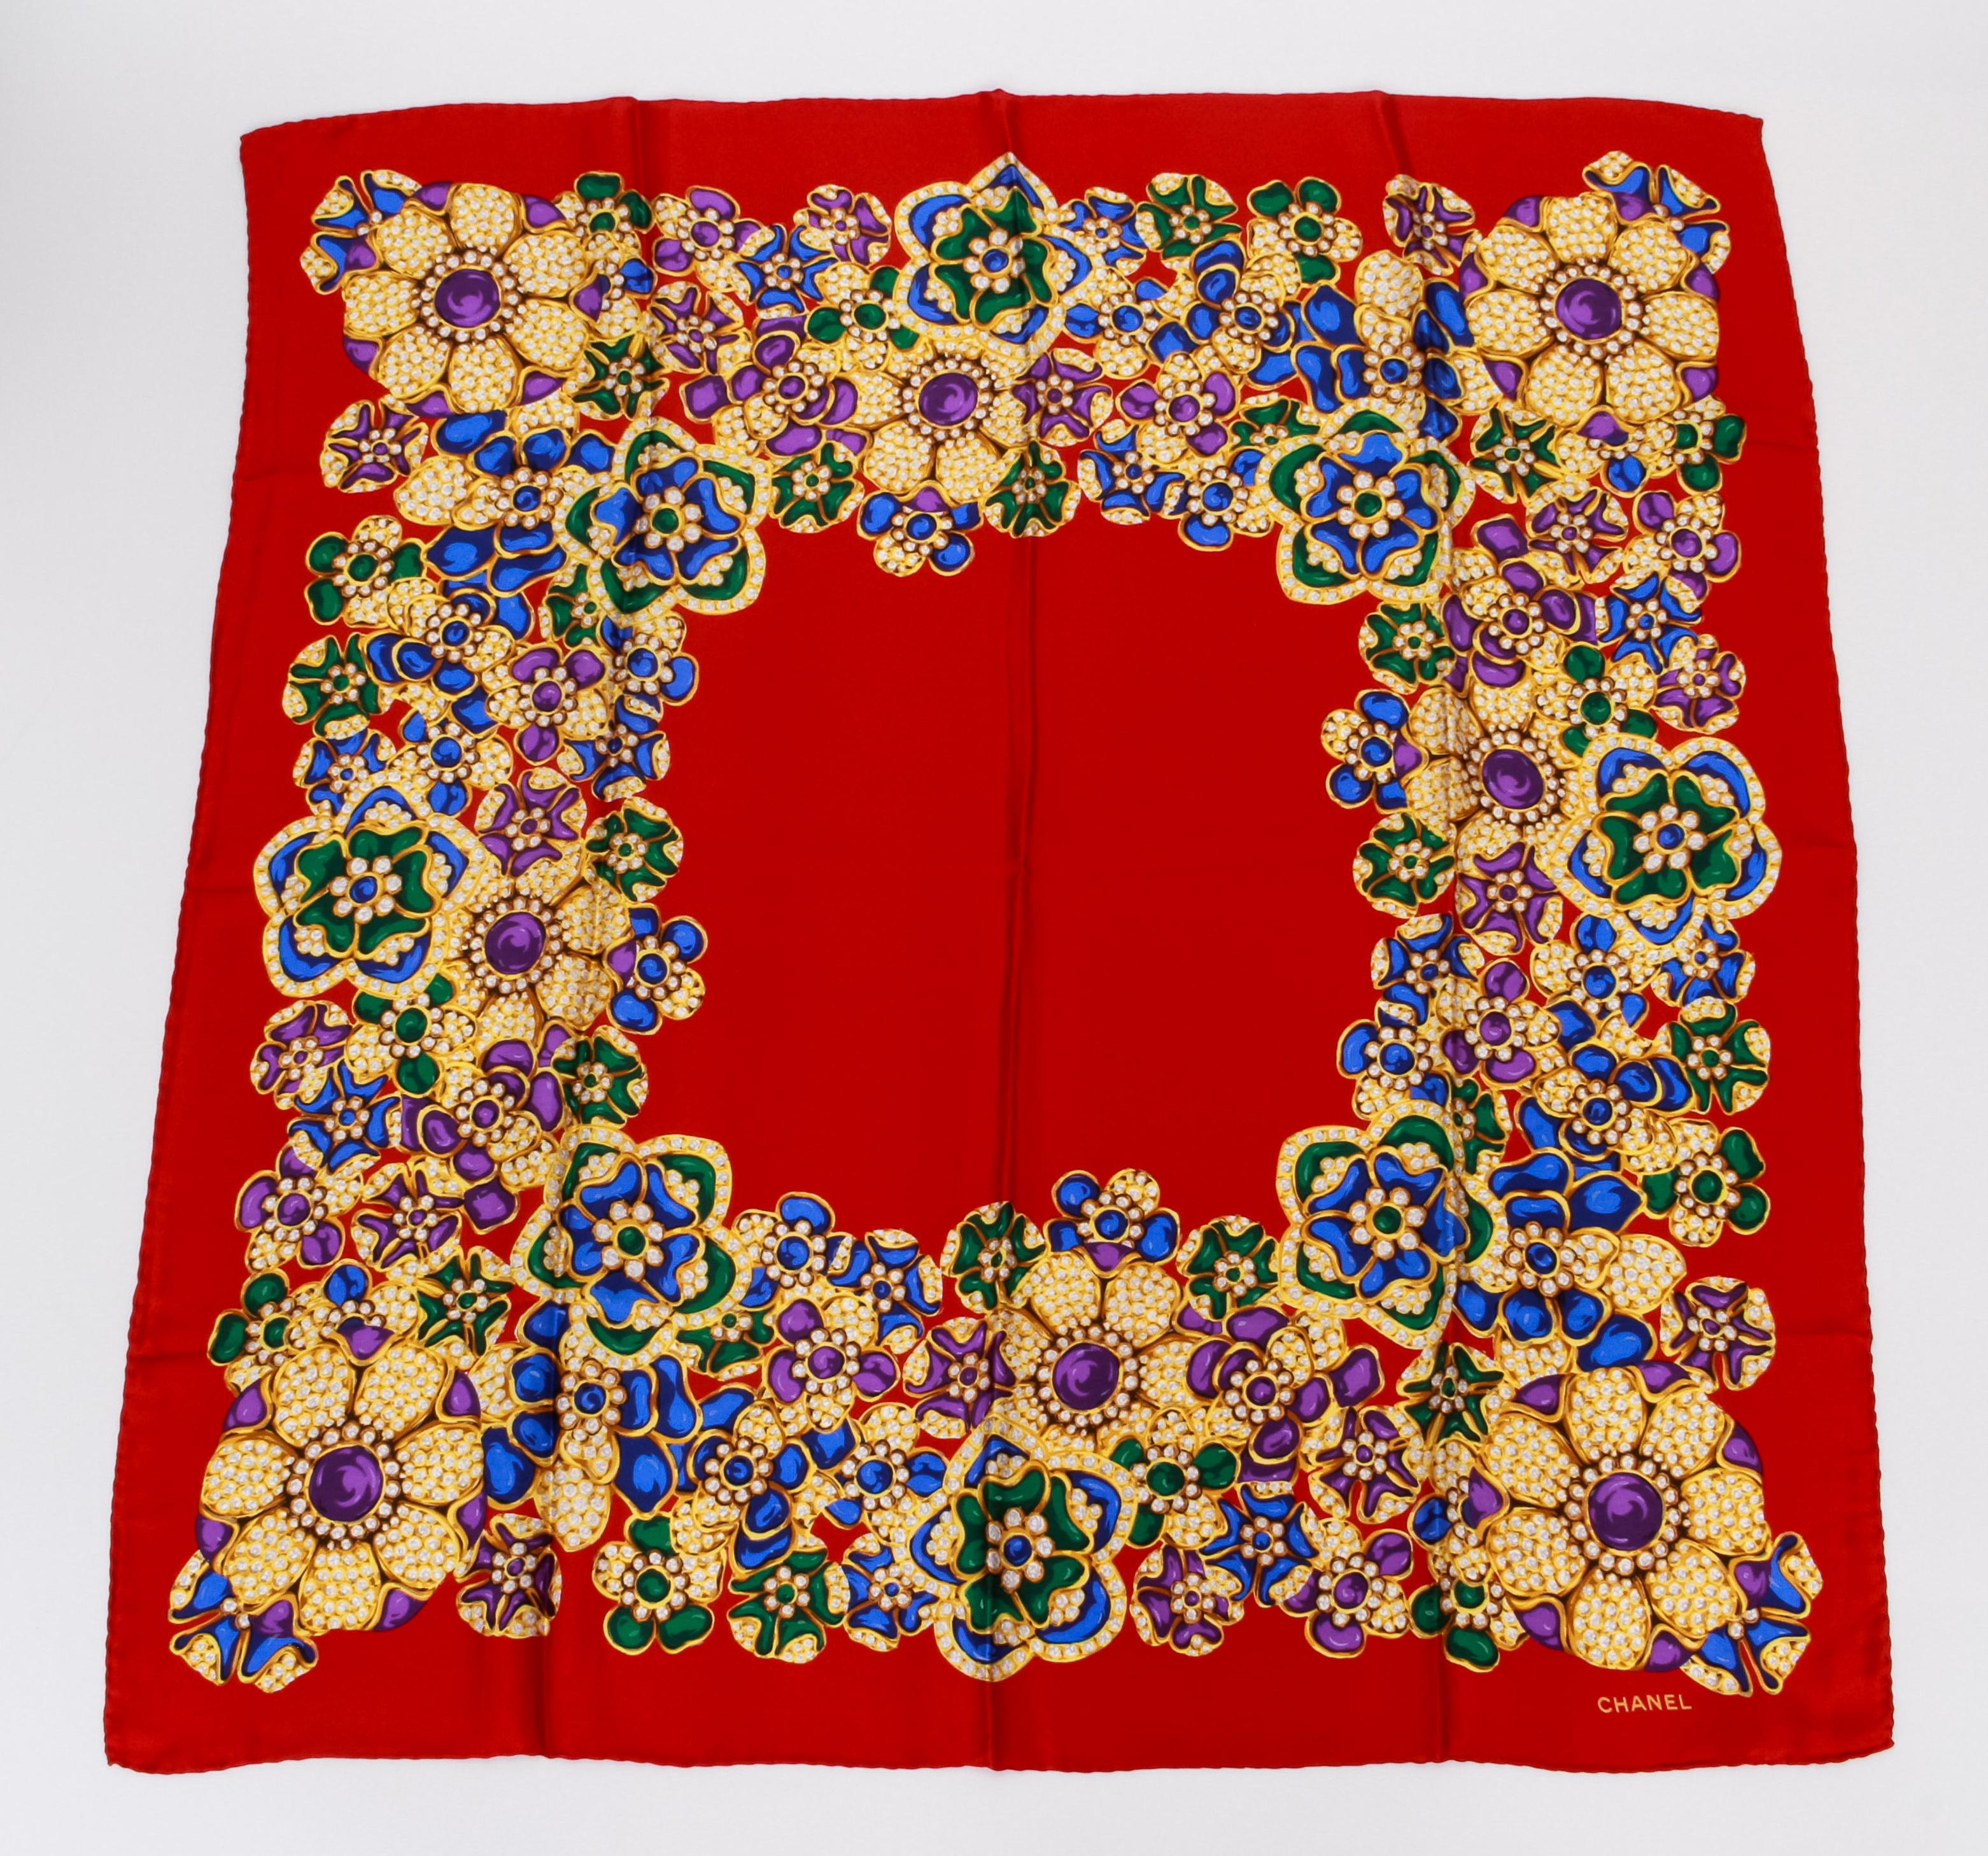 Chanel rare and collectible bright red gripoix silk scarf, original care tag still attached. Excellent condition. Hand rolled edges.
